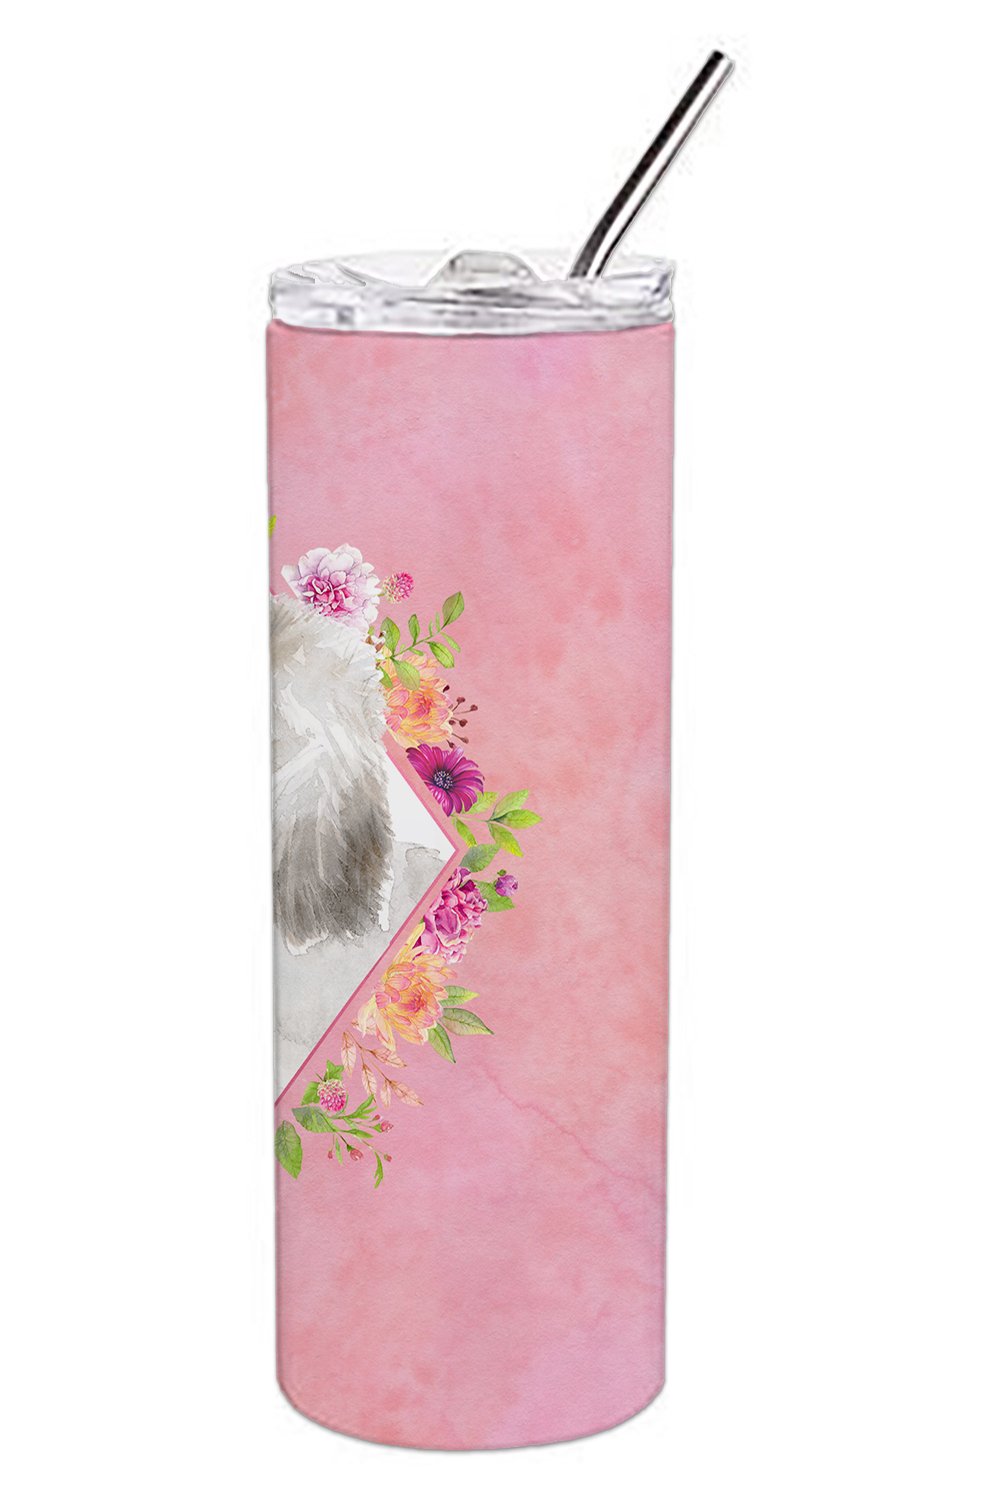 White Standard Poodle Pink Flowers Double Walled Stainless Steel 20 oz Skinny Tumbler CK4200TBL20 by Caroline's Treasures